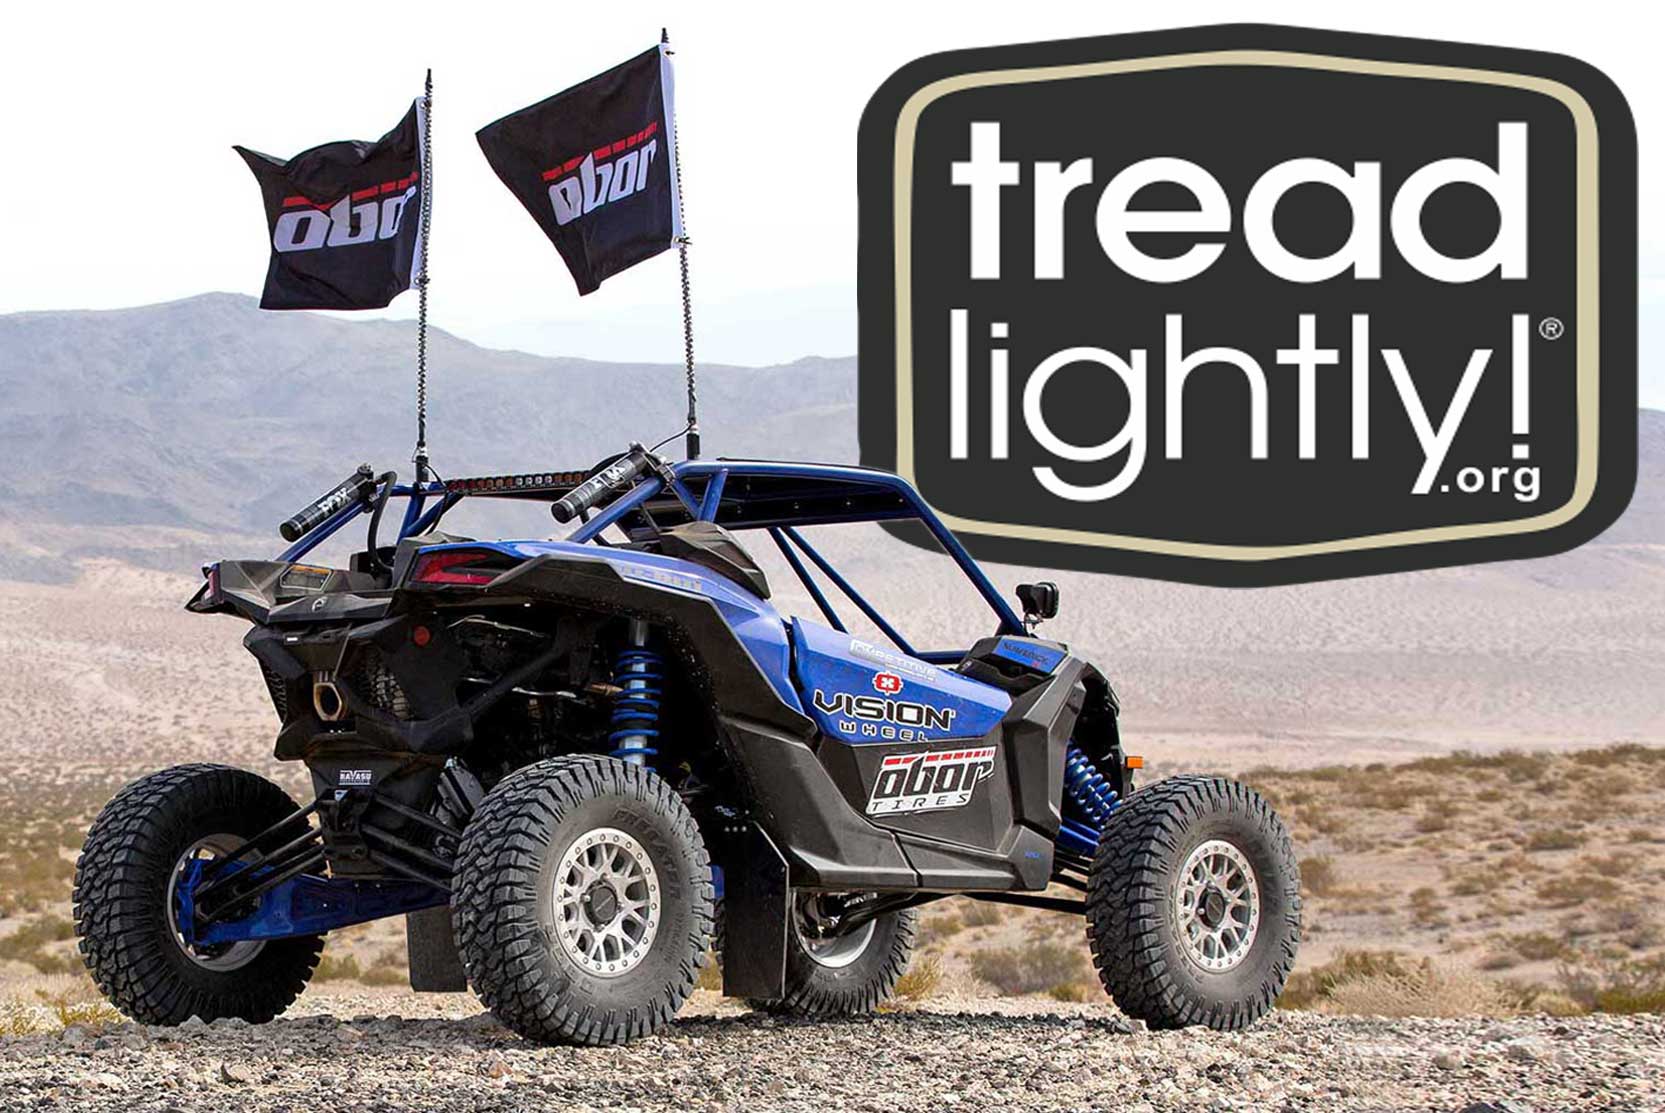 The OBOR team has joined forces with Tread Lightly!